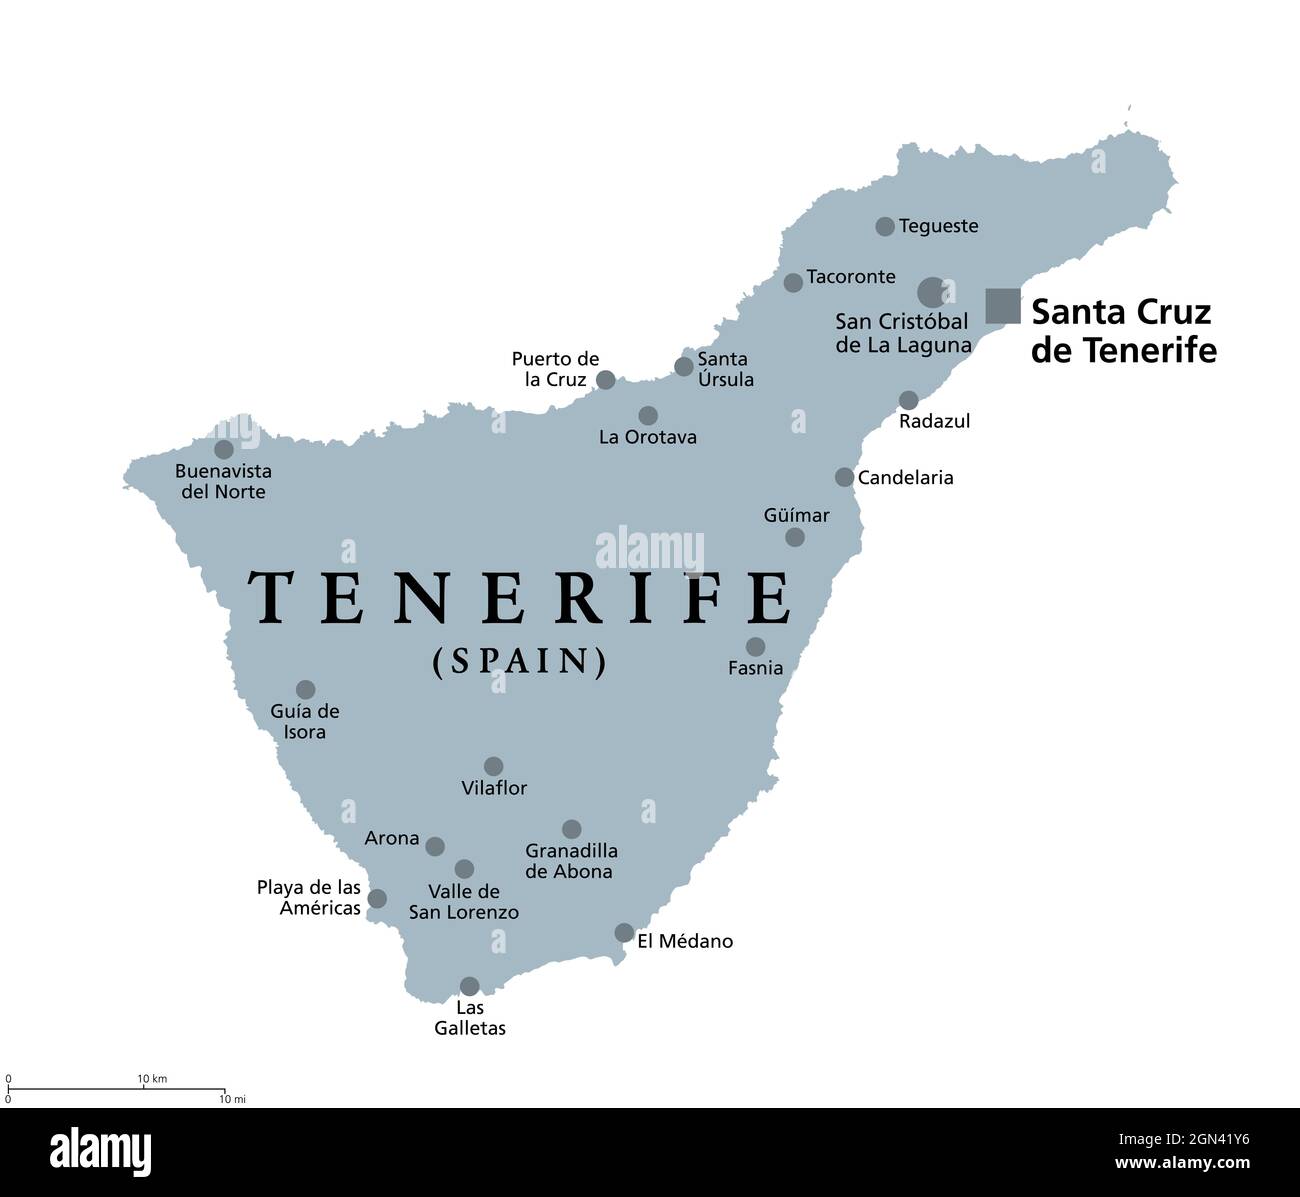 Tenerife island, gray political map, with capital Santa Cruz de Tenerife. Largest and most populous island of Canary Islands, Spain. Stock Photo